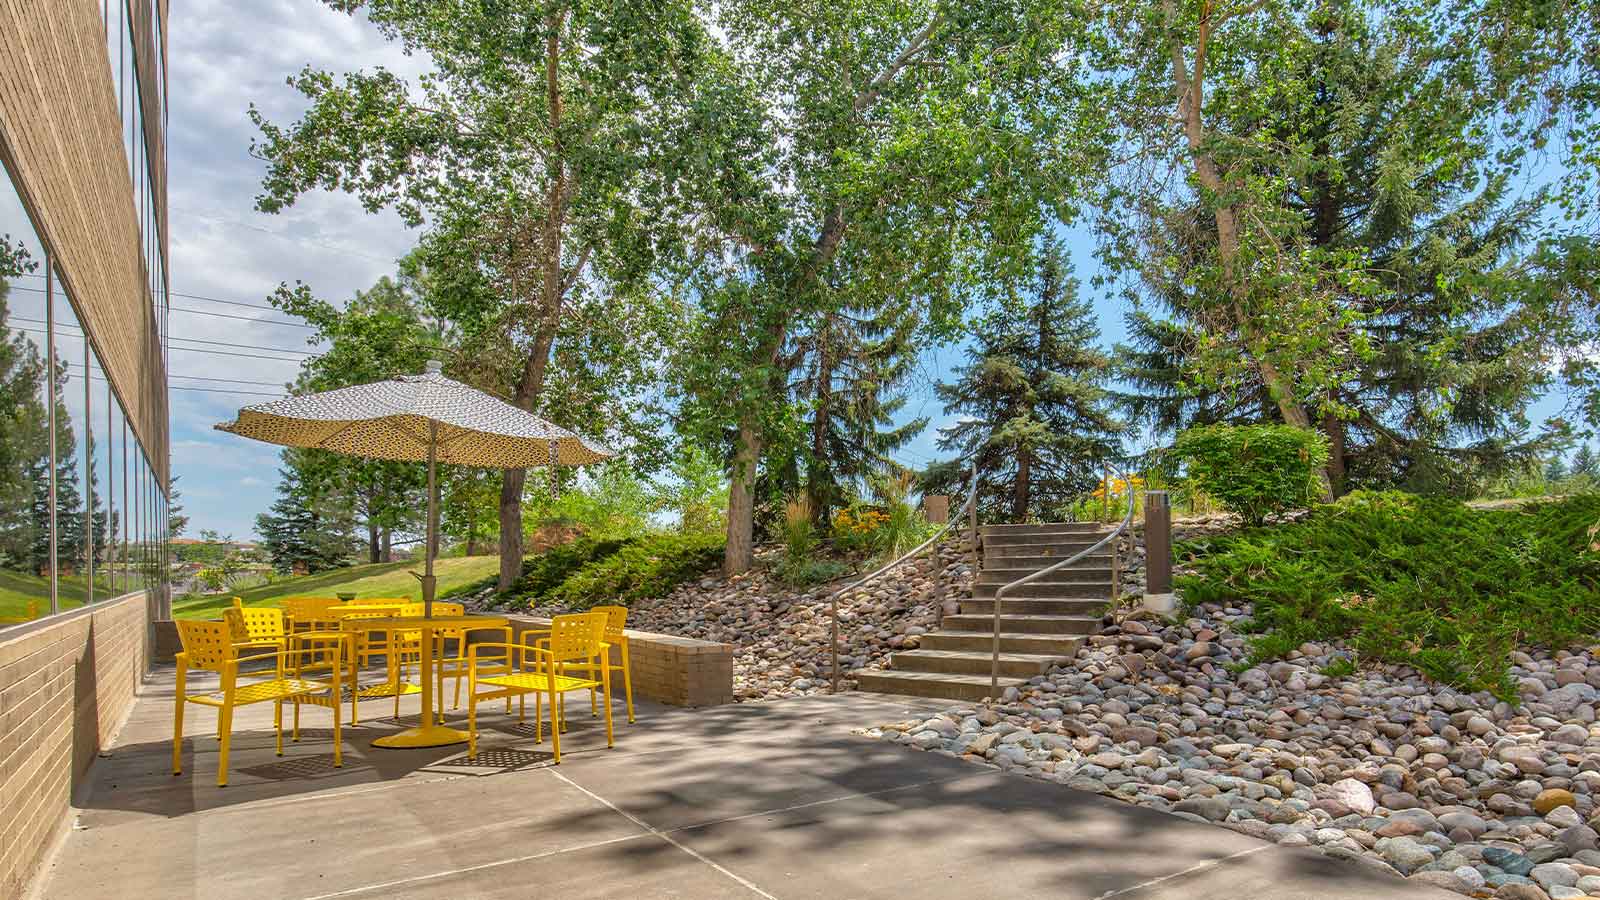 An outdoor seating area with a patterned umbrella and bright yellow chairs, next to a staircase leading to a wooded area.